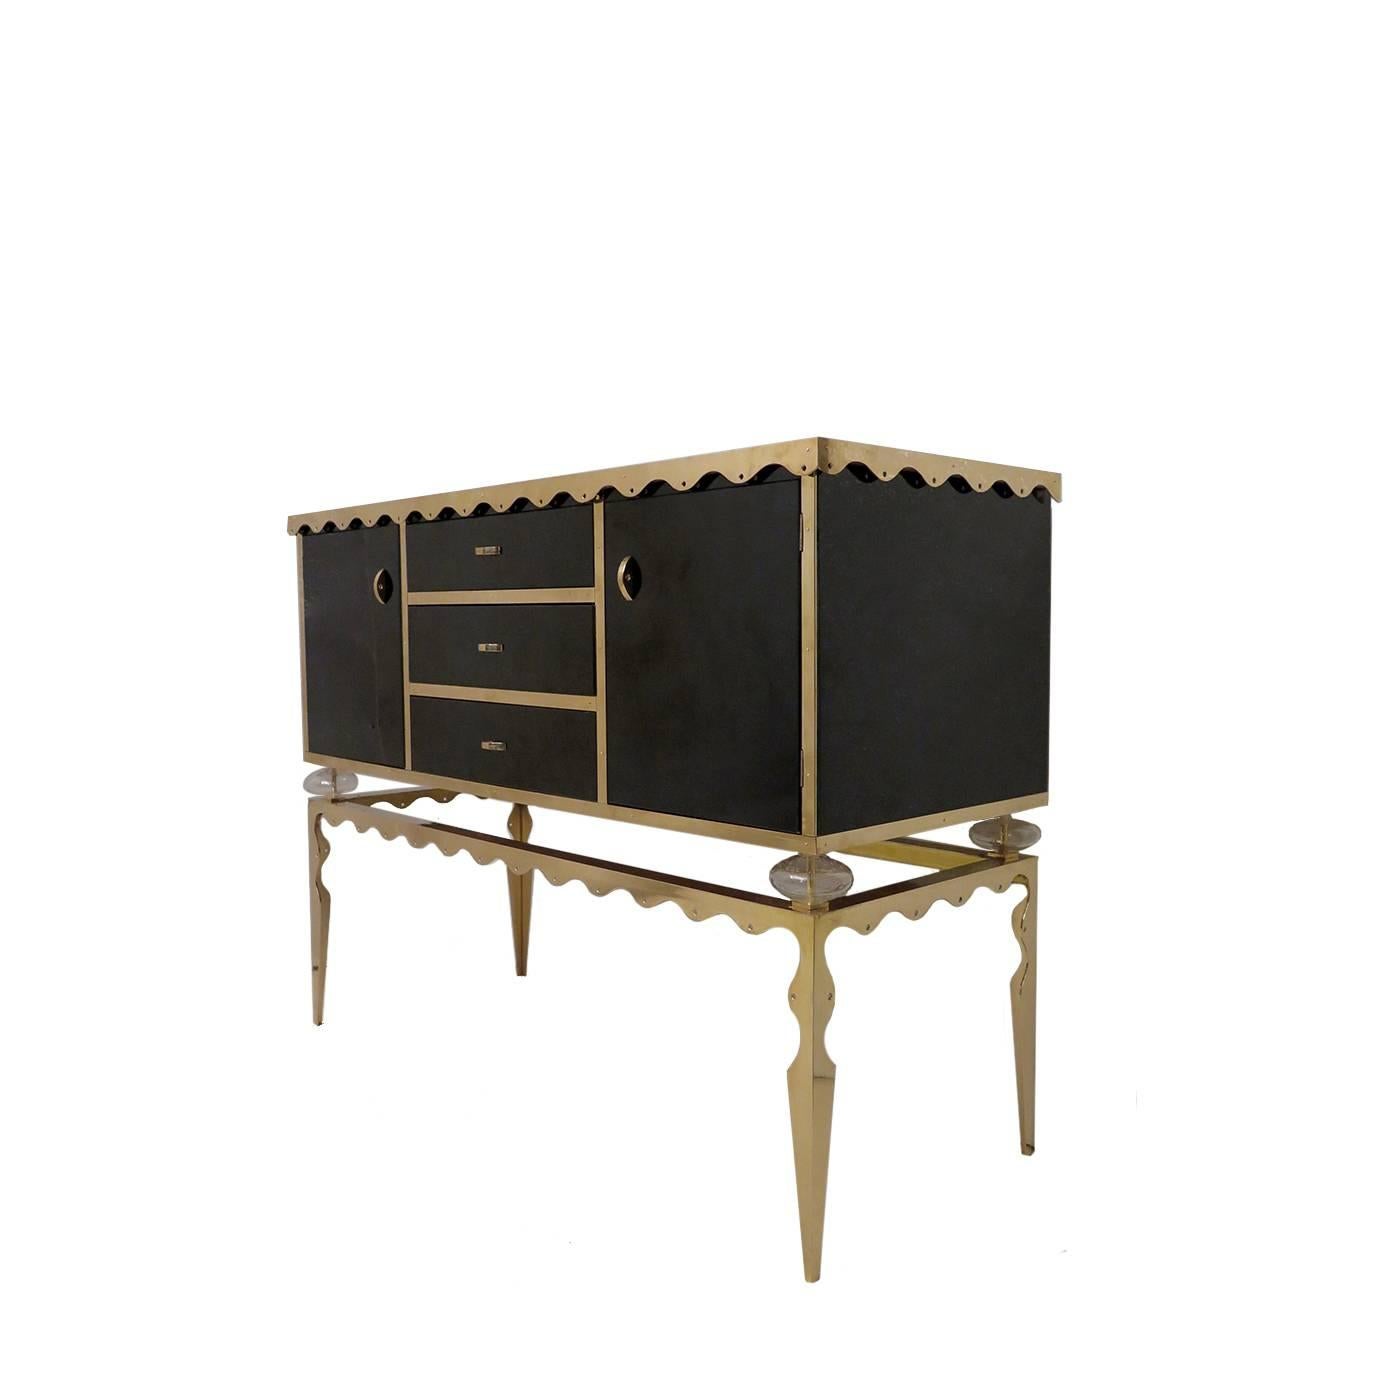 Inspired by the French Art Deco style, this sideboard features a body entirely covered in glass with a striking black coloration. The front is divided into two side doors and three central drawers. The black of the piece is elegantly paired with the